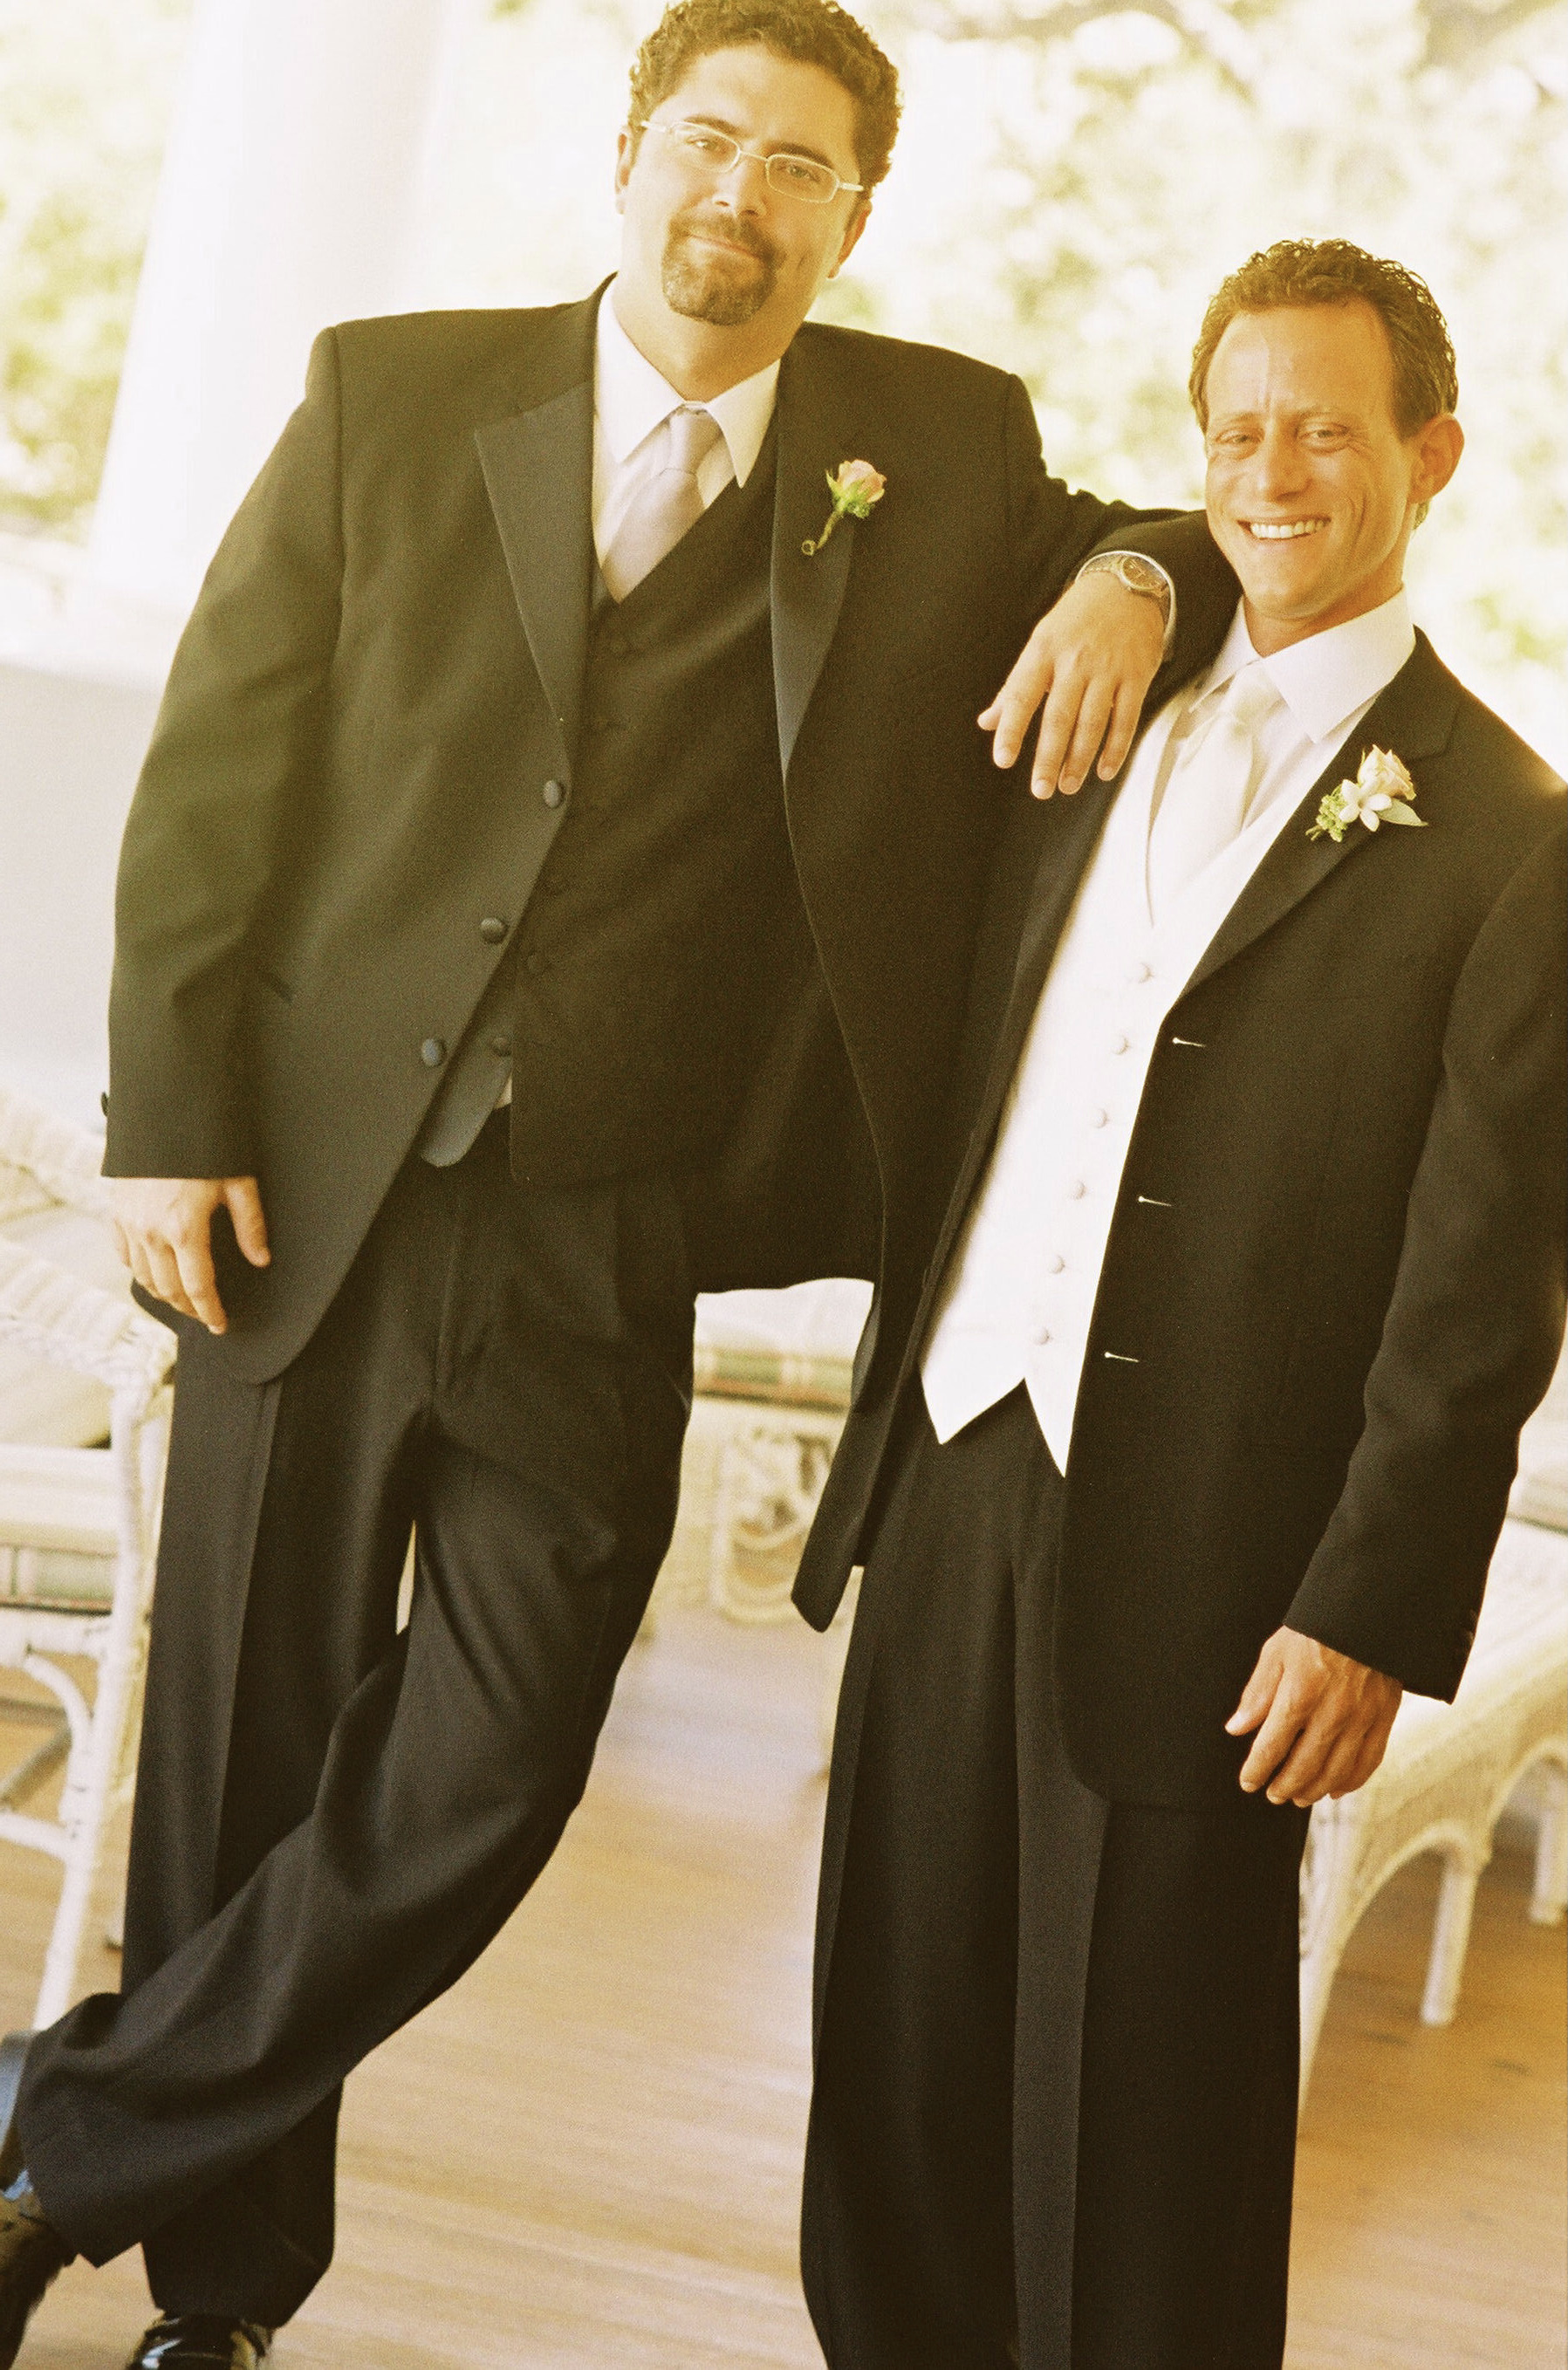 Two people dressed in tuxedos